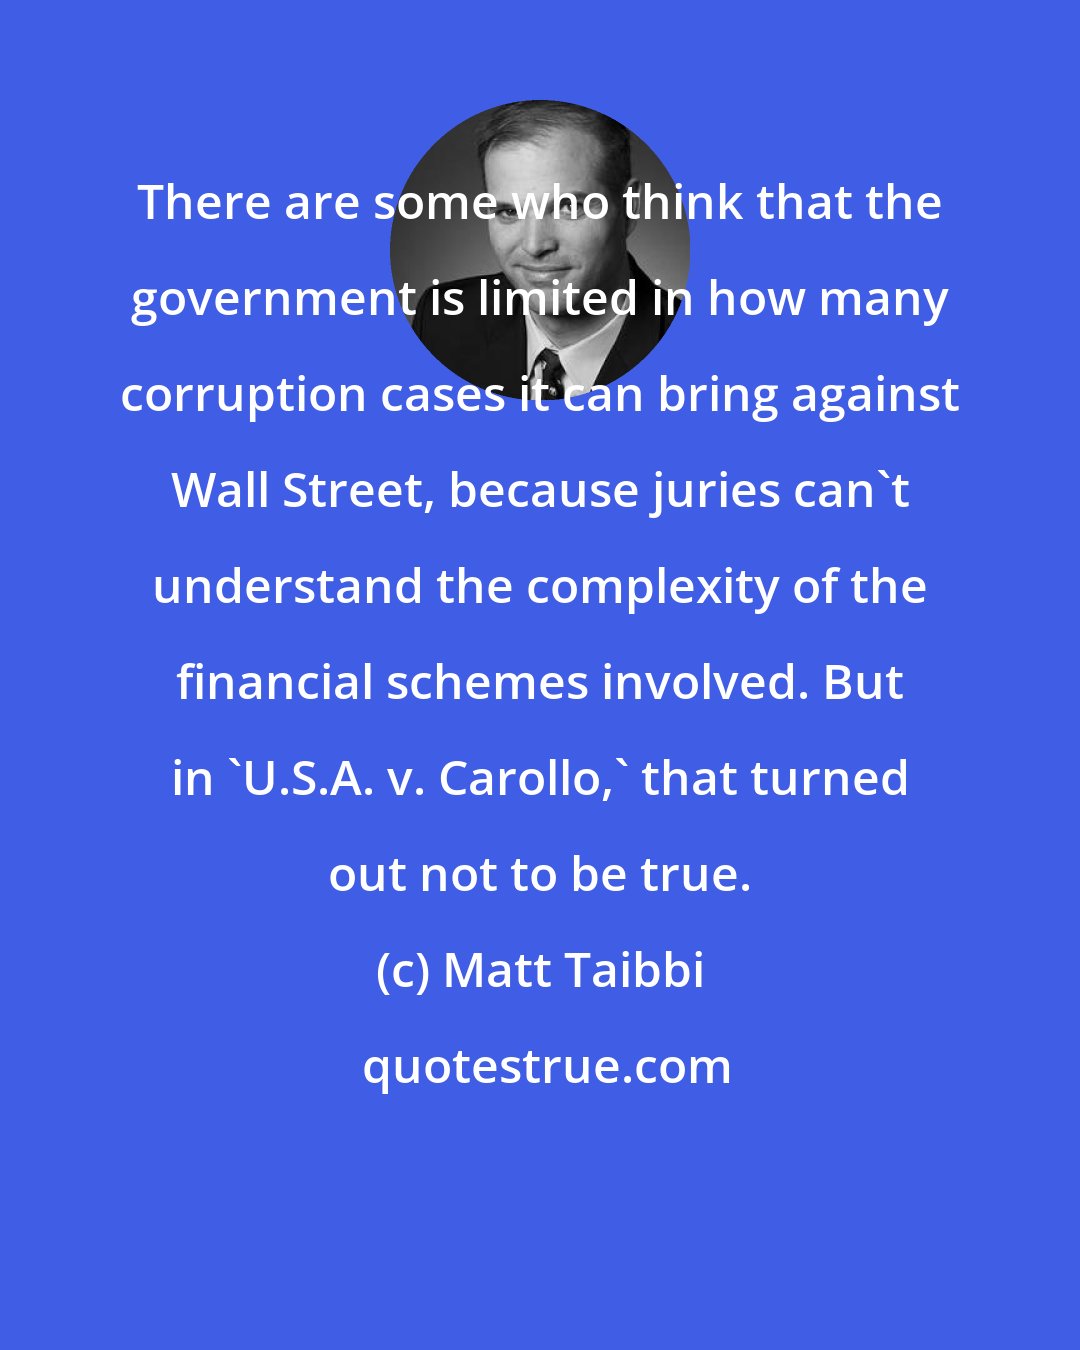 Matt Taibbi: There are some who think that the government is limited in how many corruption cases it can bring against Wall Street, because juries can't understand the complexity of the financial schemes involved. But in 'U.S.A. v. Carollo,' that turned out not to be true.